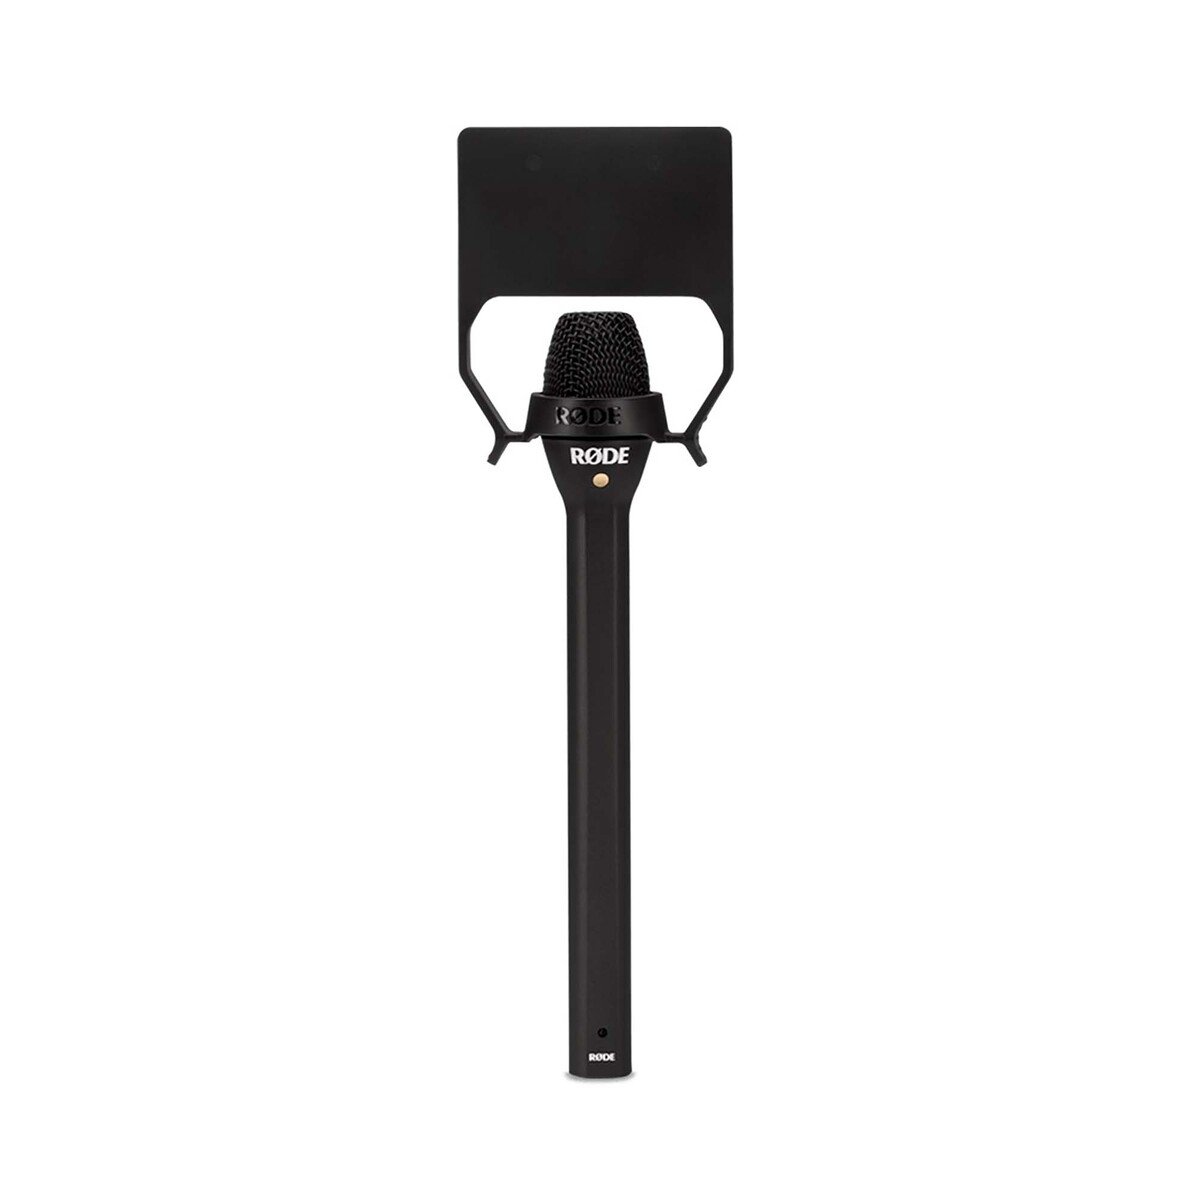 Rode Reporter Omnidirectional Interview Microphone